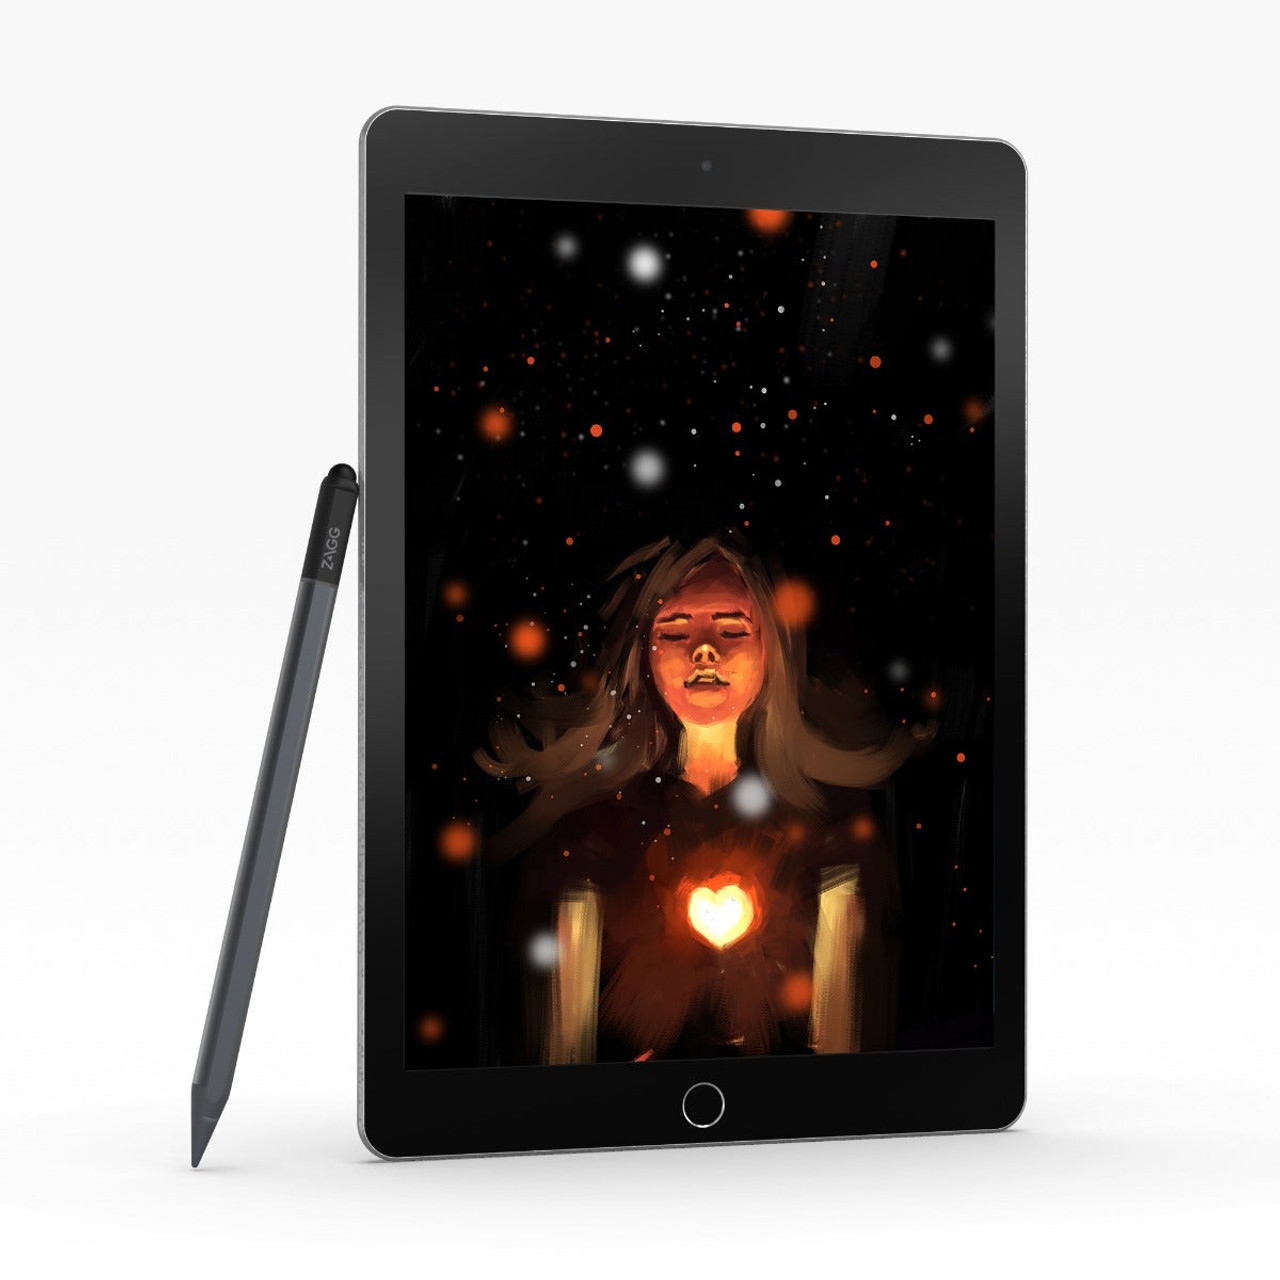 Pro Stylus | Sketch, Take Notes, and Do More with Your iPad or Tablet